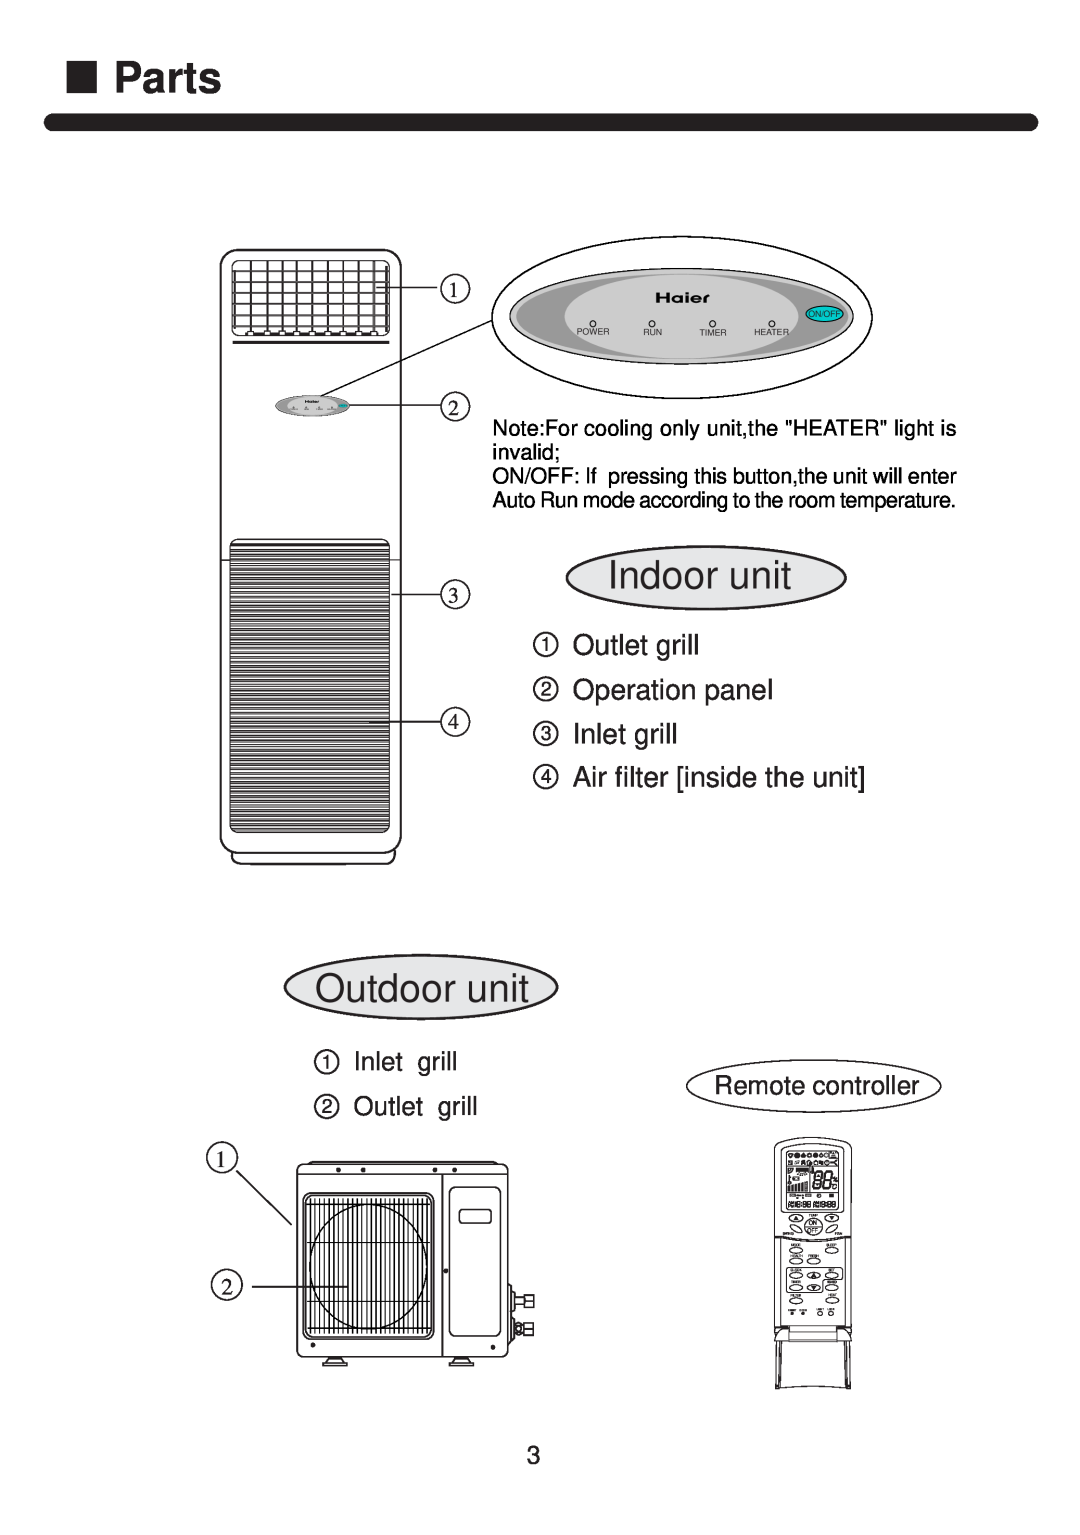 Haier HPU-42CF03 Parts, 3Indoor unit, Outdoor unit, 1Outlet grill 2Operation panel 43 Inlet grill, On Off, Temp 